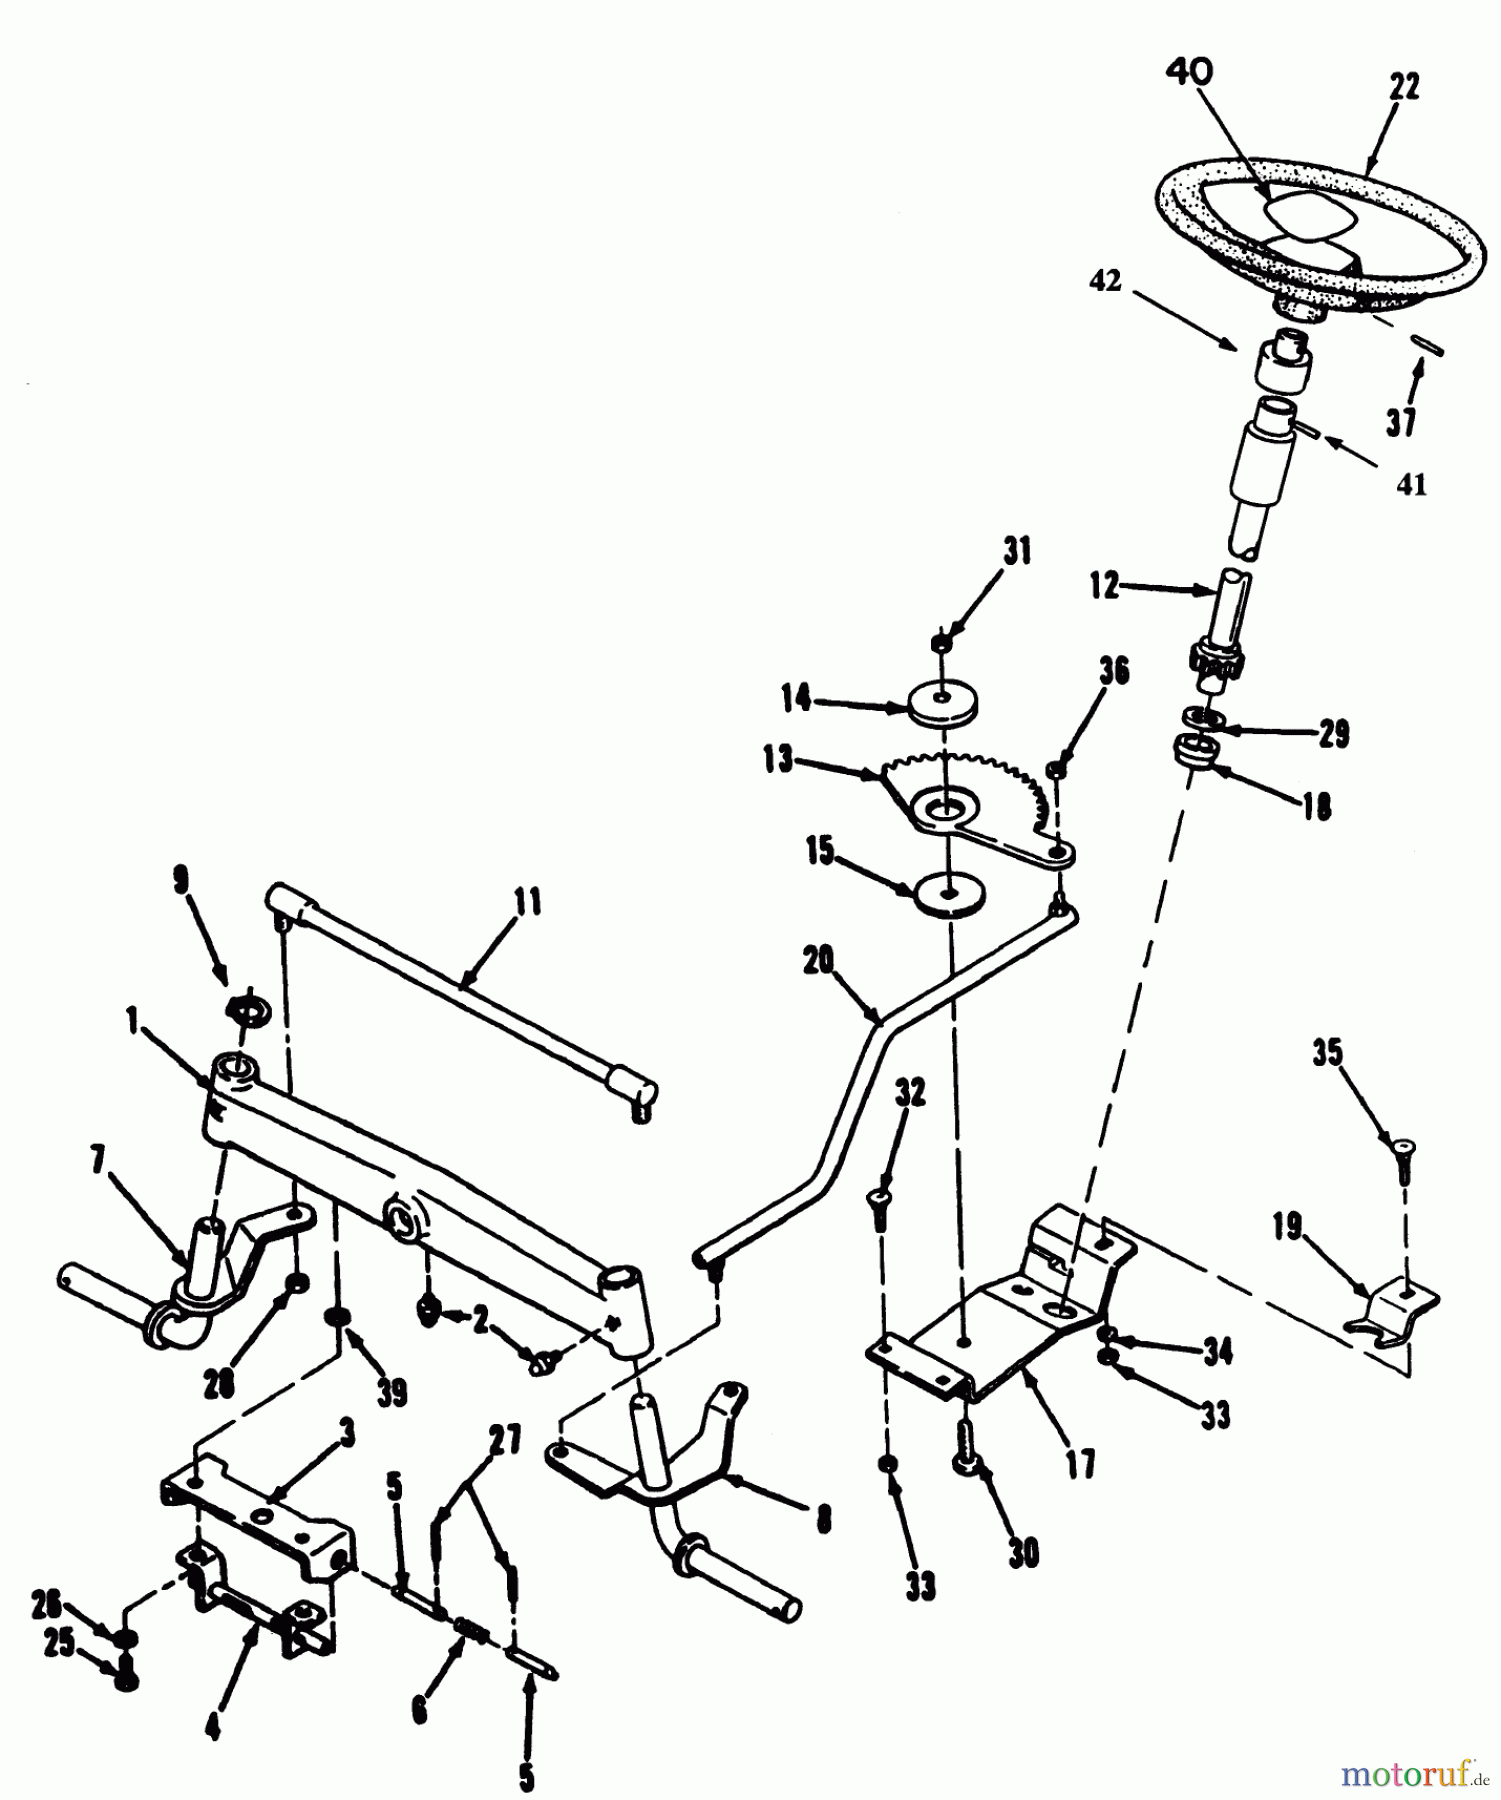  Toro Neu Mowers, Lawn & Garden Tractor Seite 1 32-12OE03 (212-H) - Toro 212-H Tractor, 1992 (2000001-2999999) FRONT AXLE & STEERING ASSEMBLY